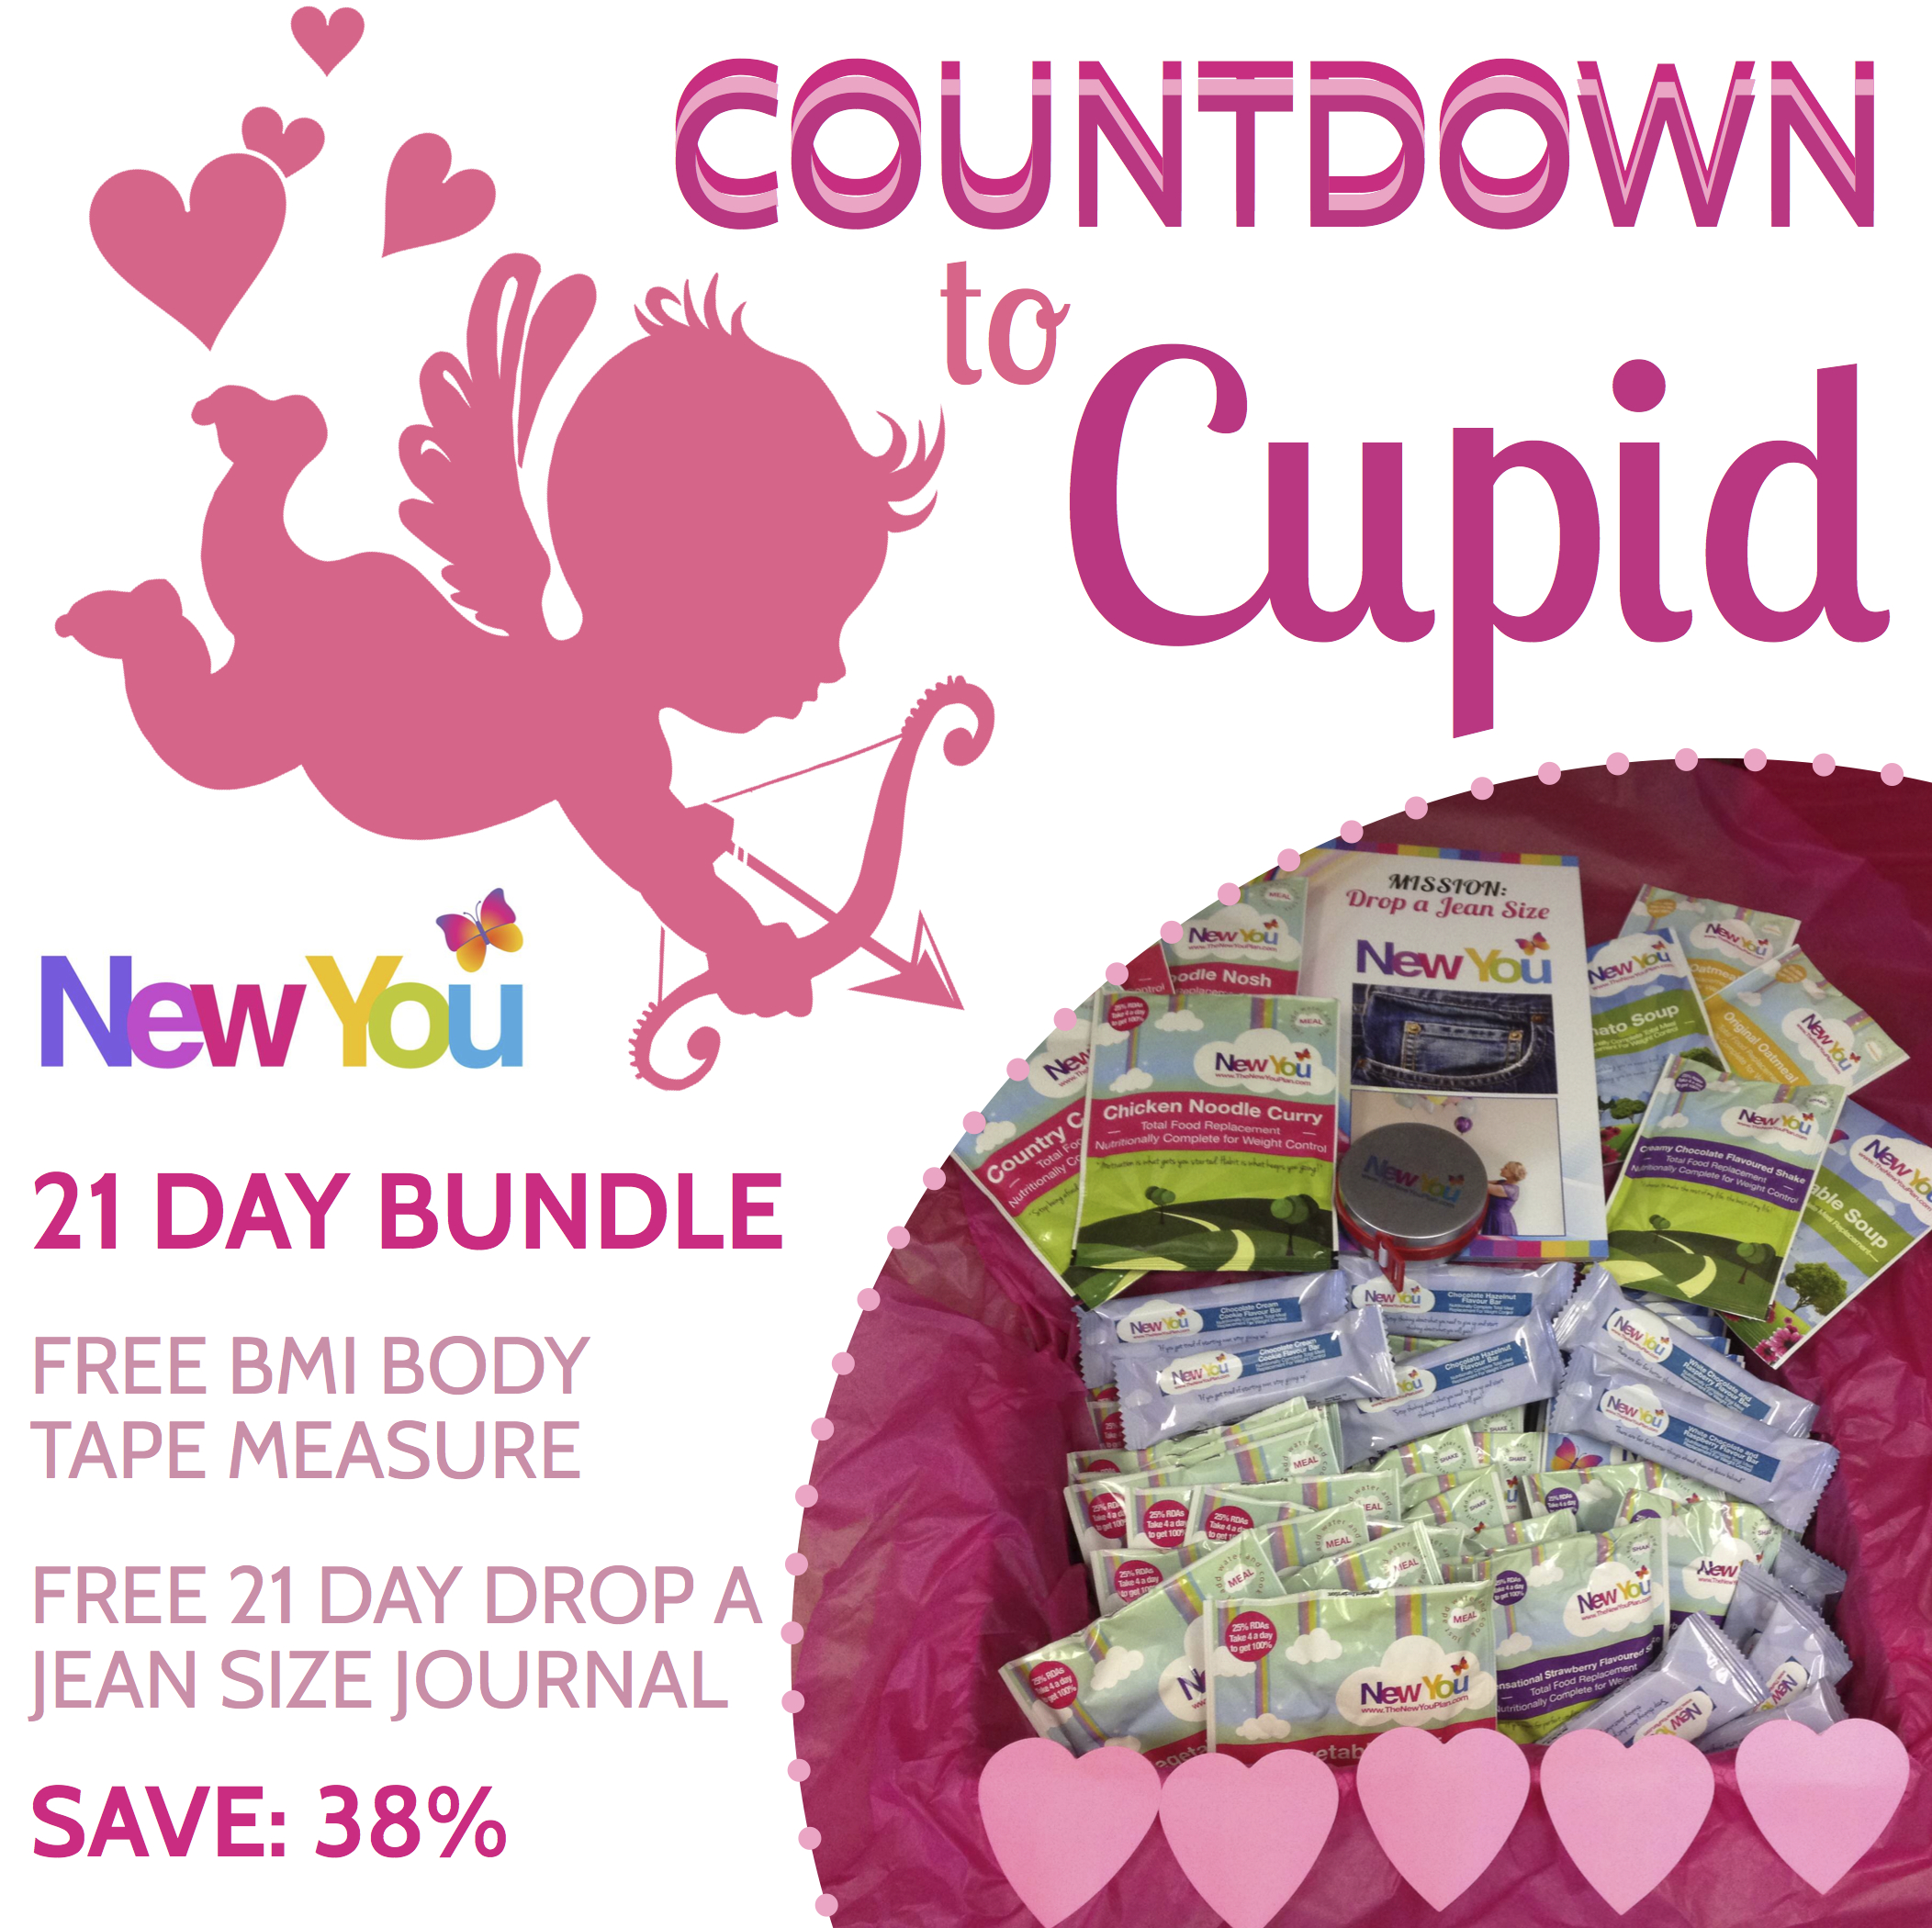 COUNTDOWN TO CUPID